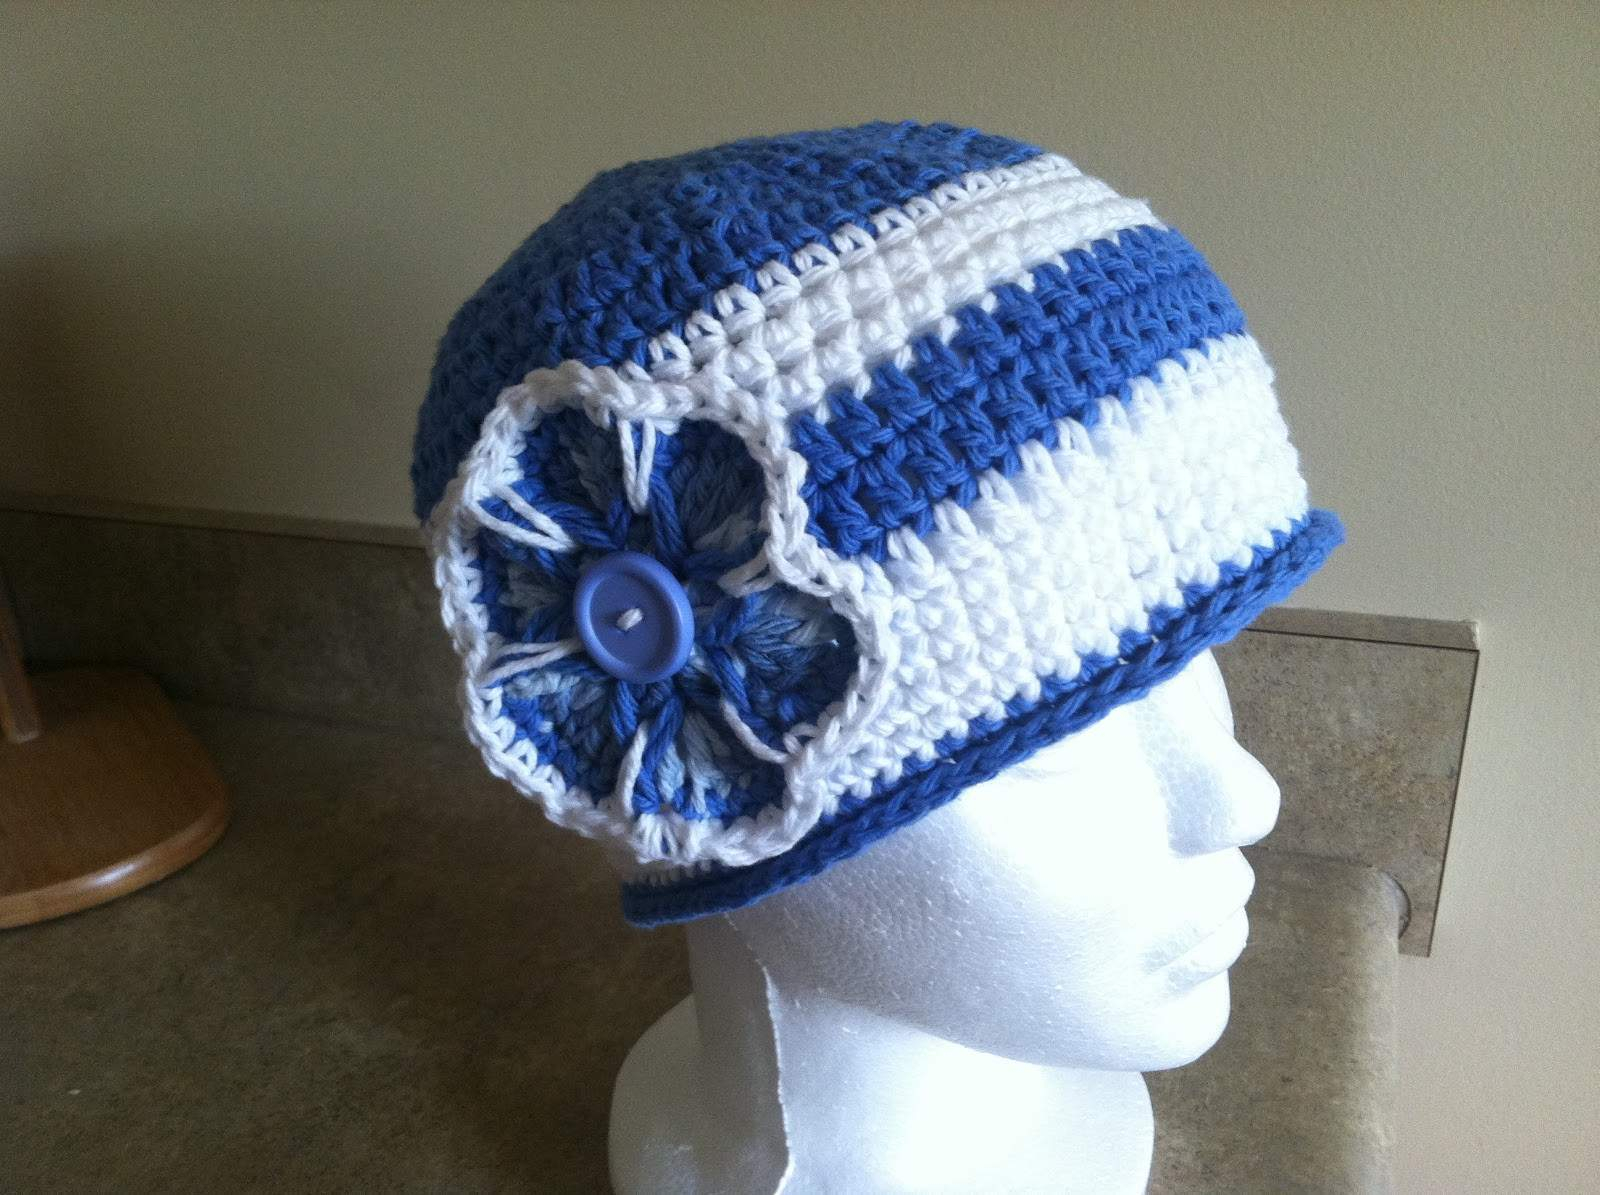 Knit Chemo Cap Pattern Awesome Free Chemo Cap Knit Pattern Free Chemo Hat Patterns